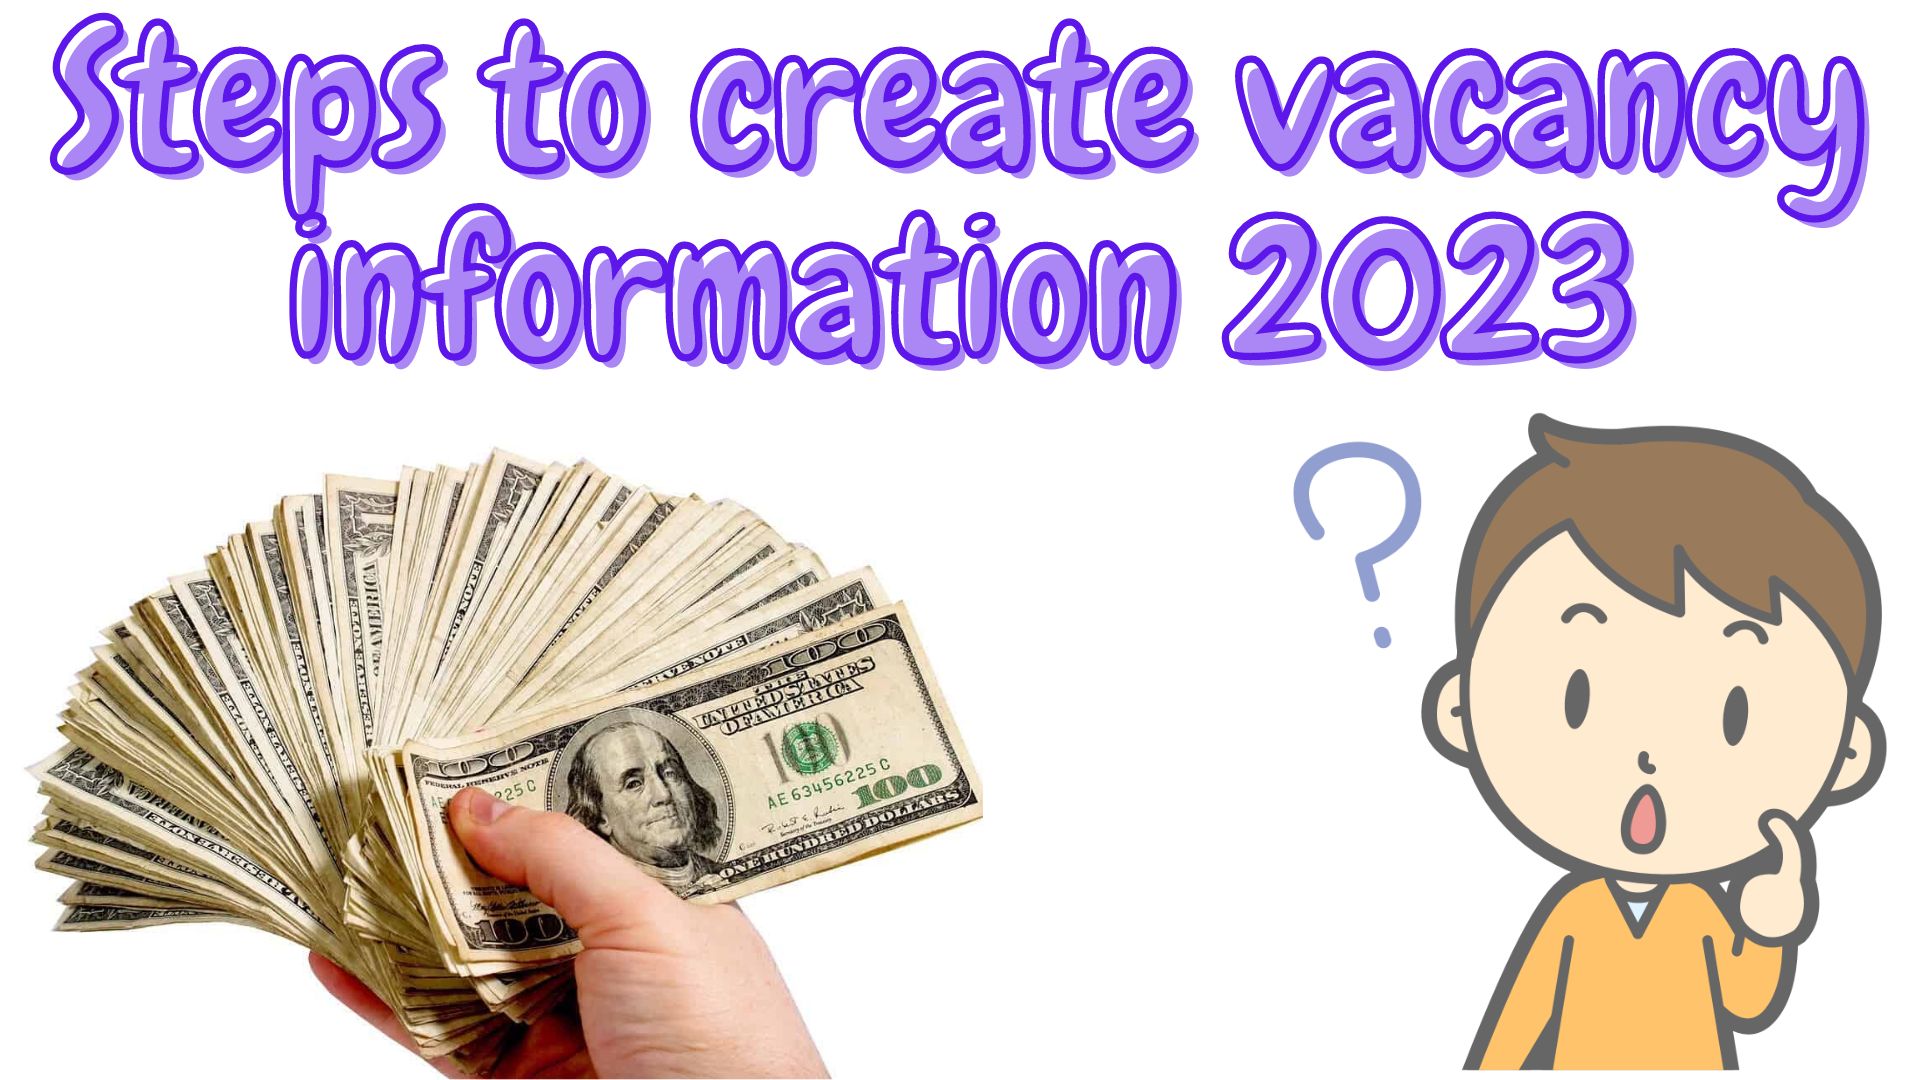 Steps to create vacancy information 2023